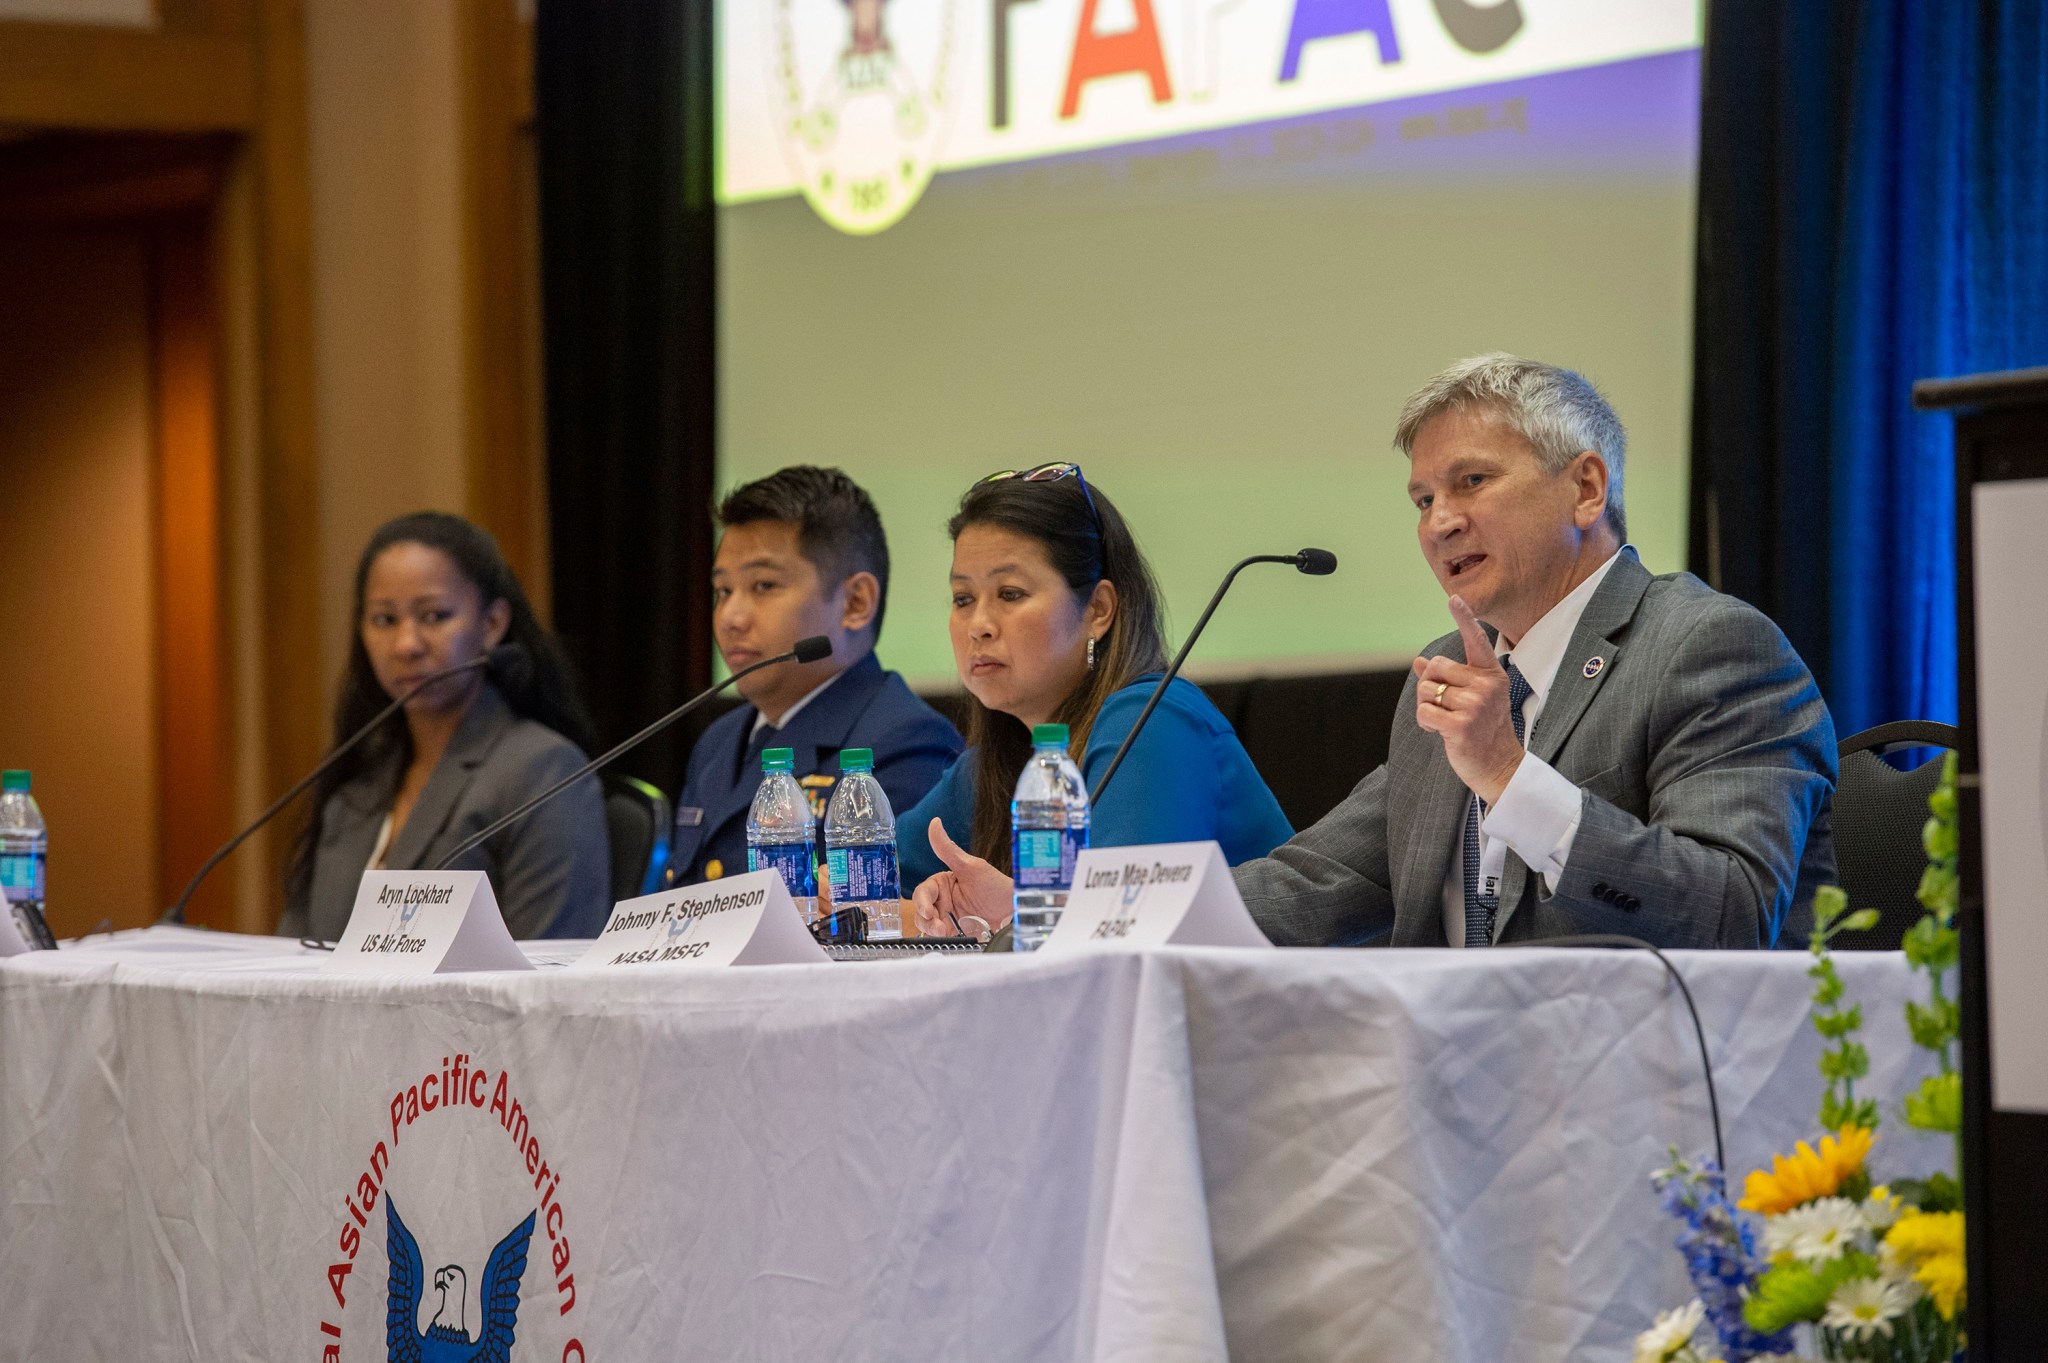 Johnny Stephenson, right, takes part in a May 16 FAPAC panel discussing leadership tactics and diversity in the government.